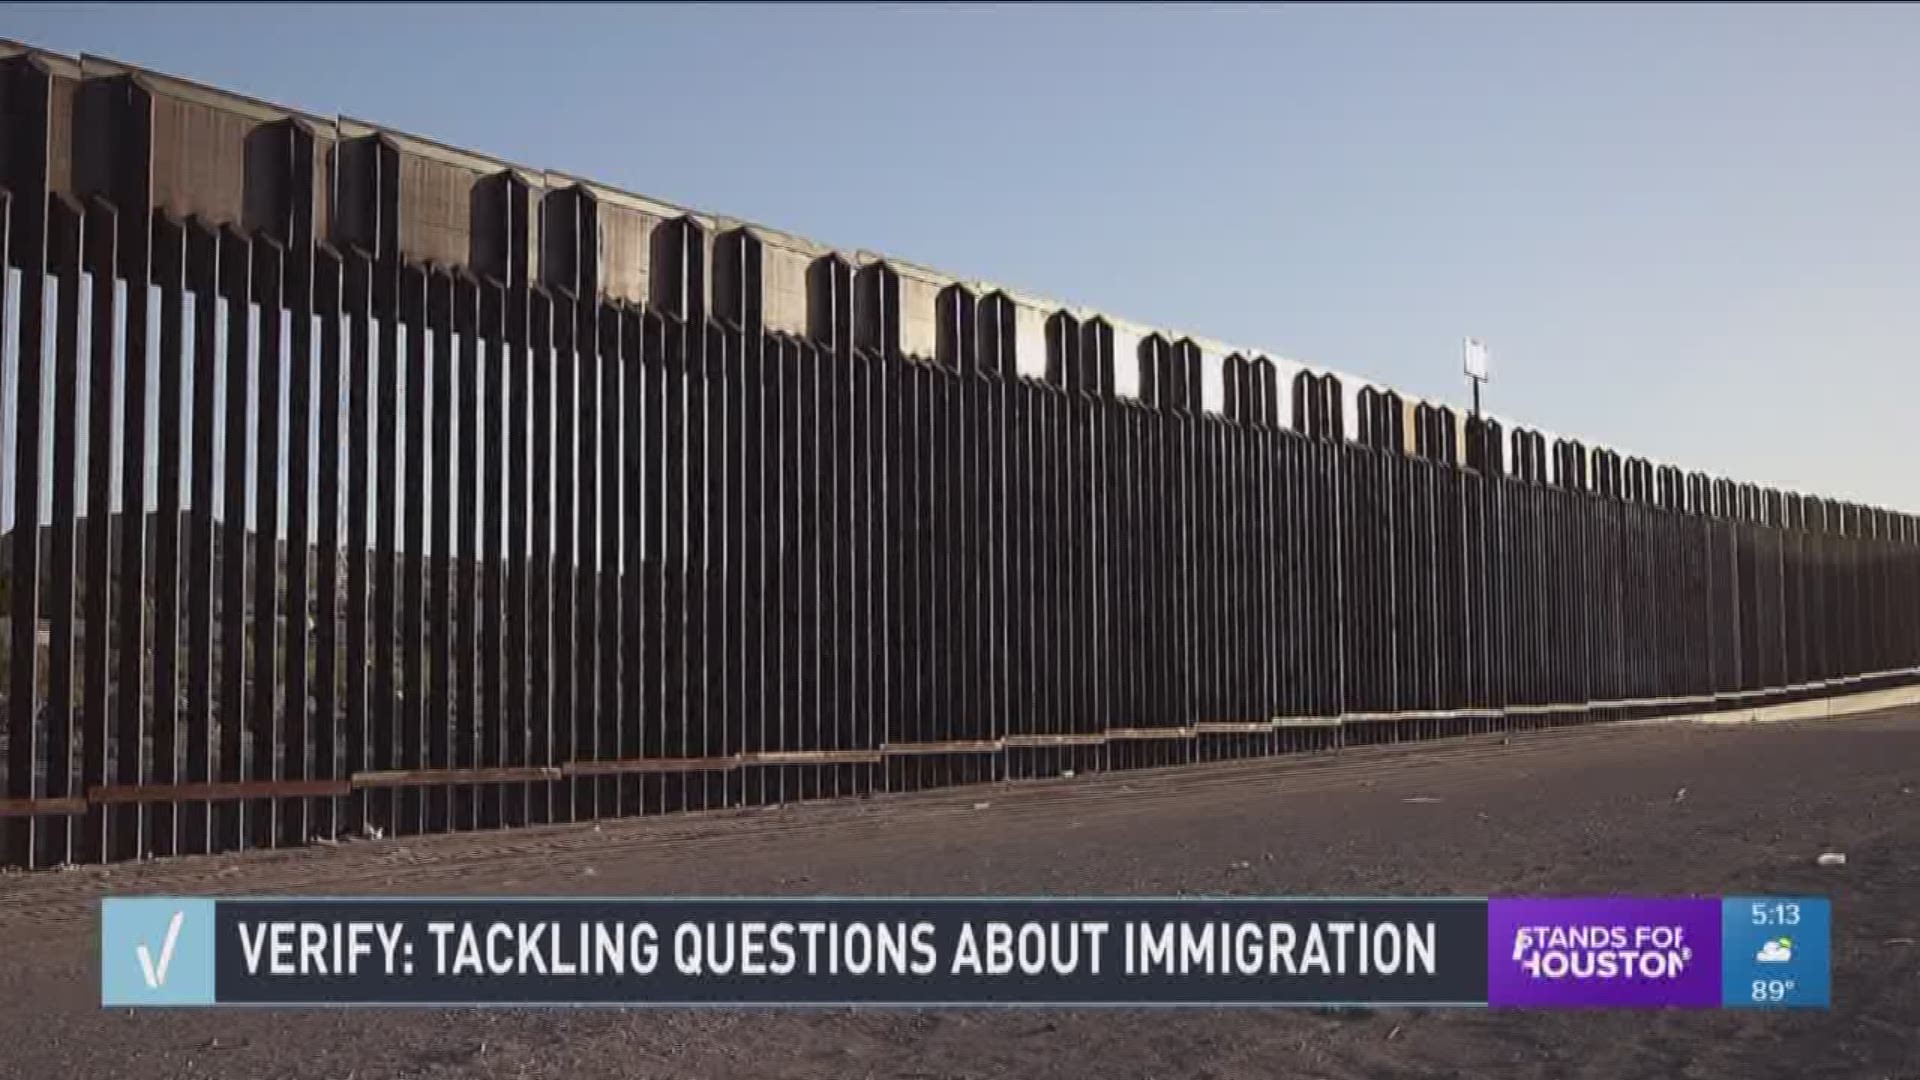 As the conversation continues over immigration reform, more questions are being asked. Our Verify team provides some answers.